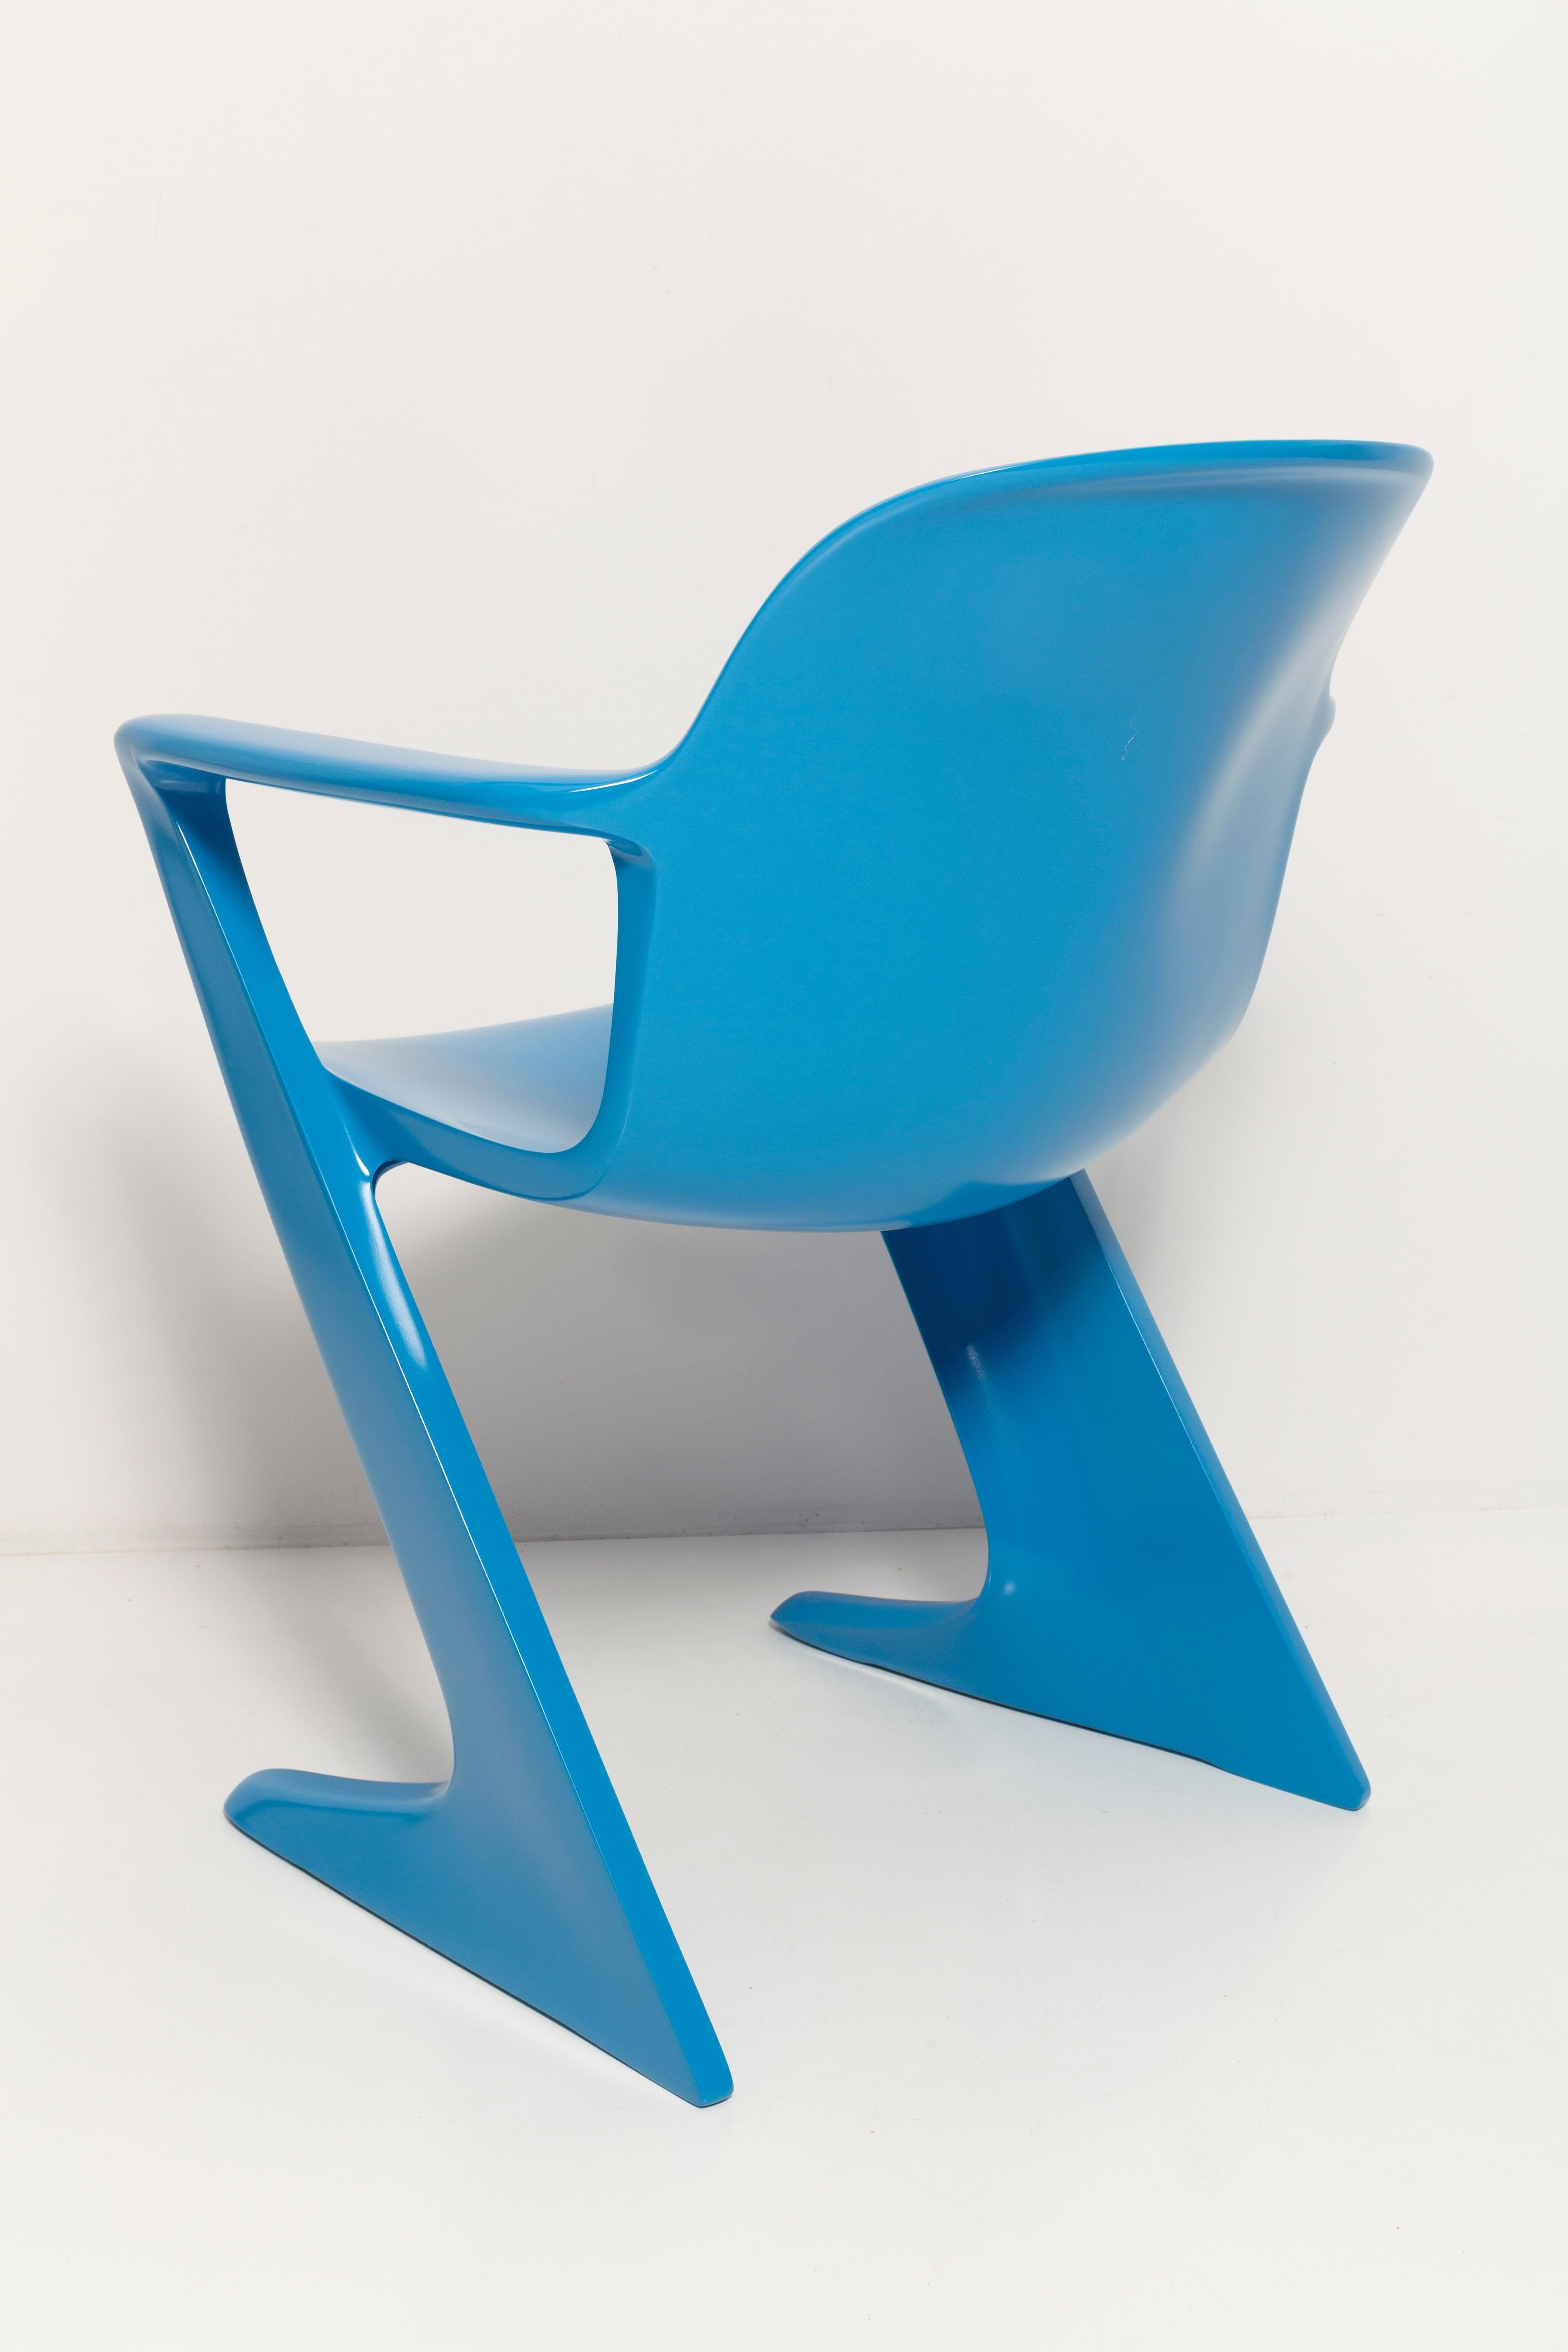 Set of Four Blue Kangaroo Chairs Designed by Ernst Moeckl, Germany, 1960s For Sale 2